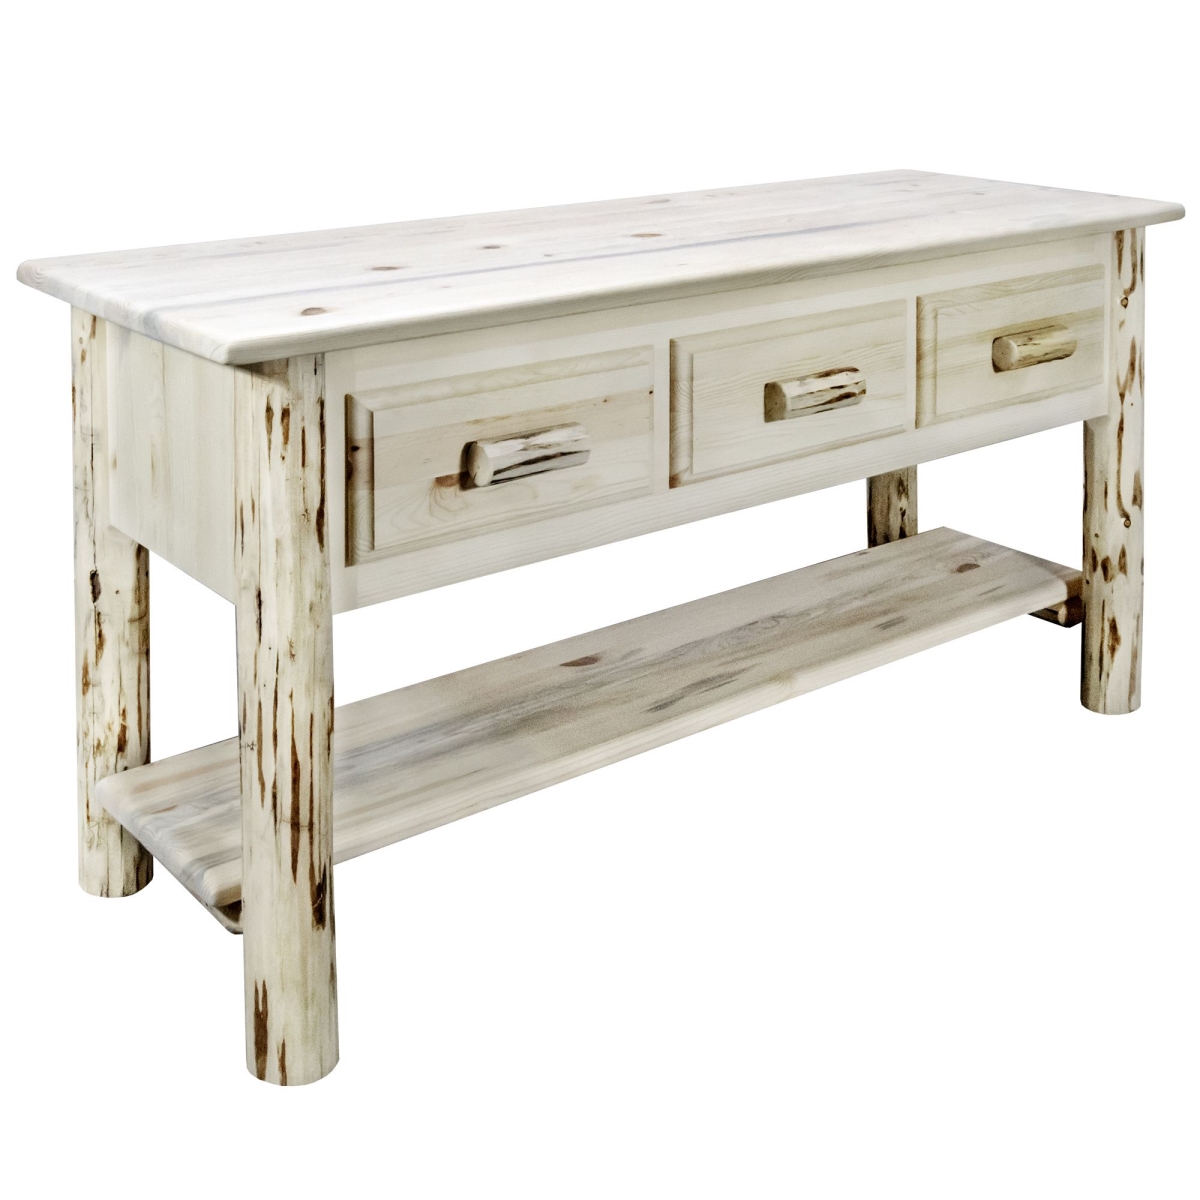 Mwcontblw3drv Montana Collection Console Table With 3 Drawers, Clear Lacquer - 5.5 X 11.75 X 10.5 In.